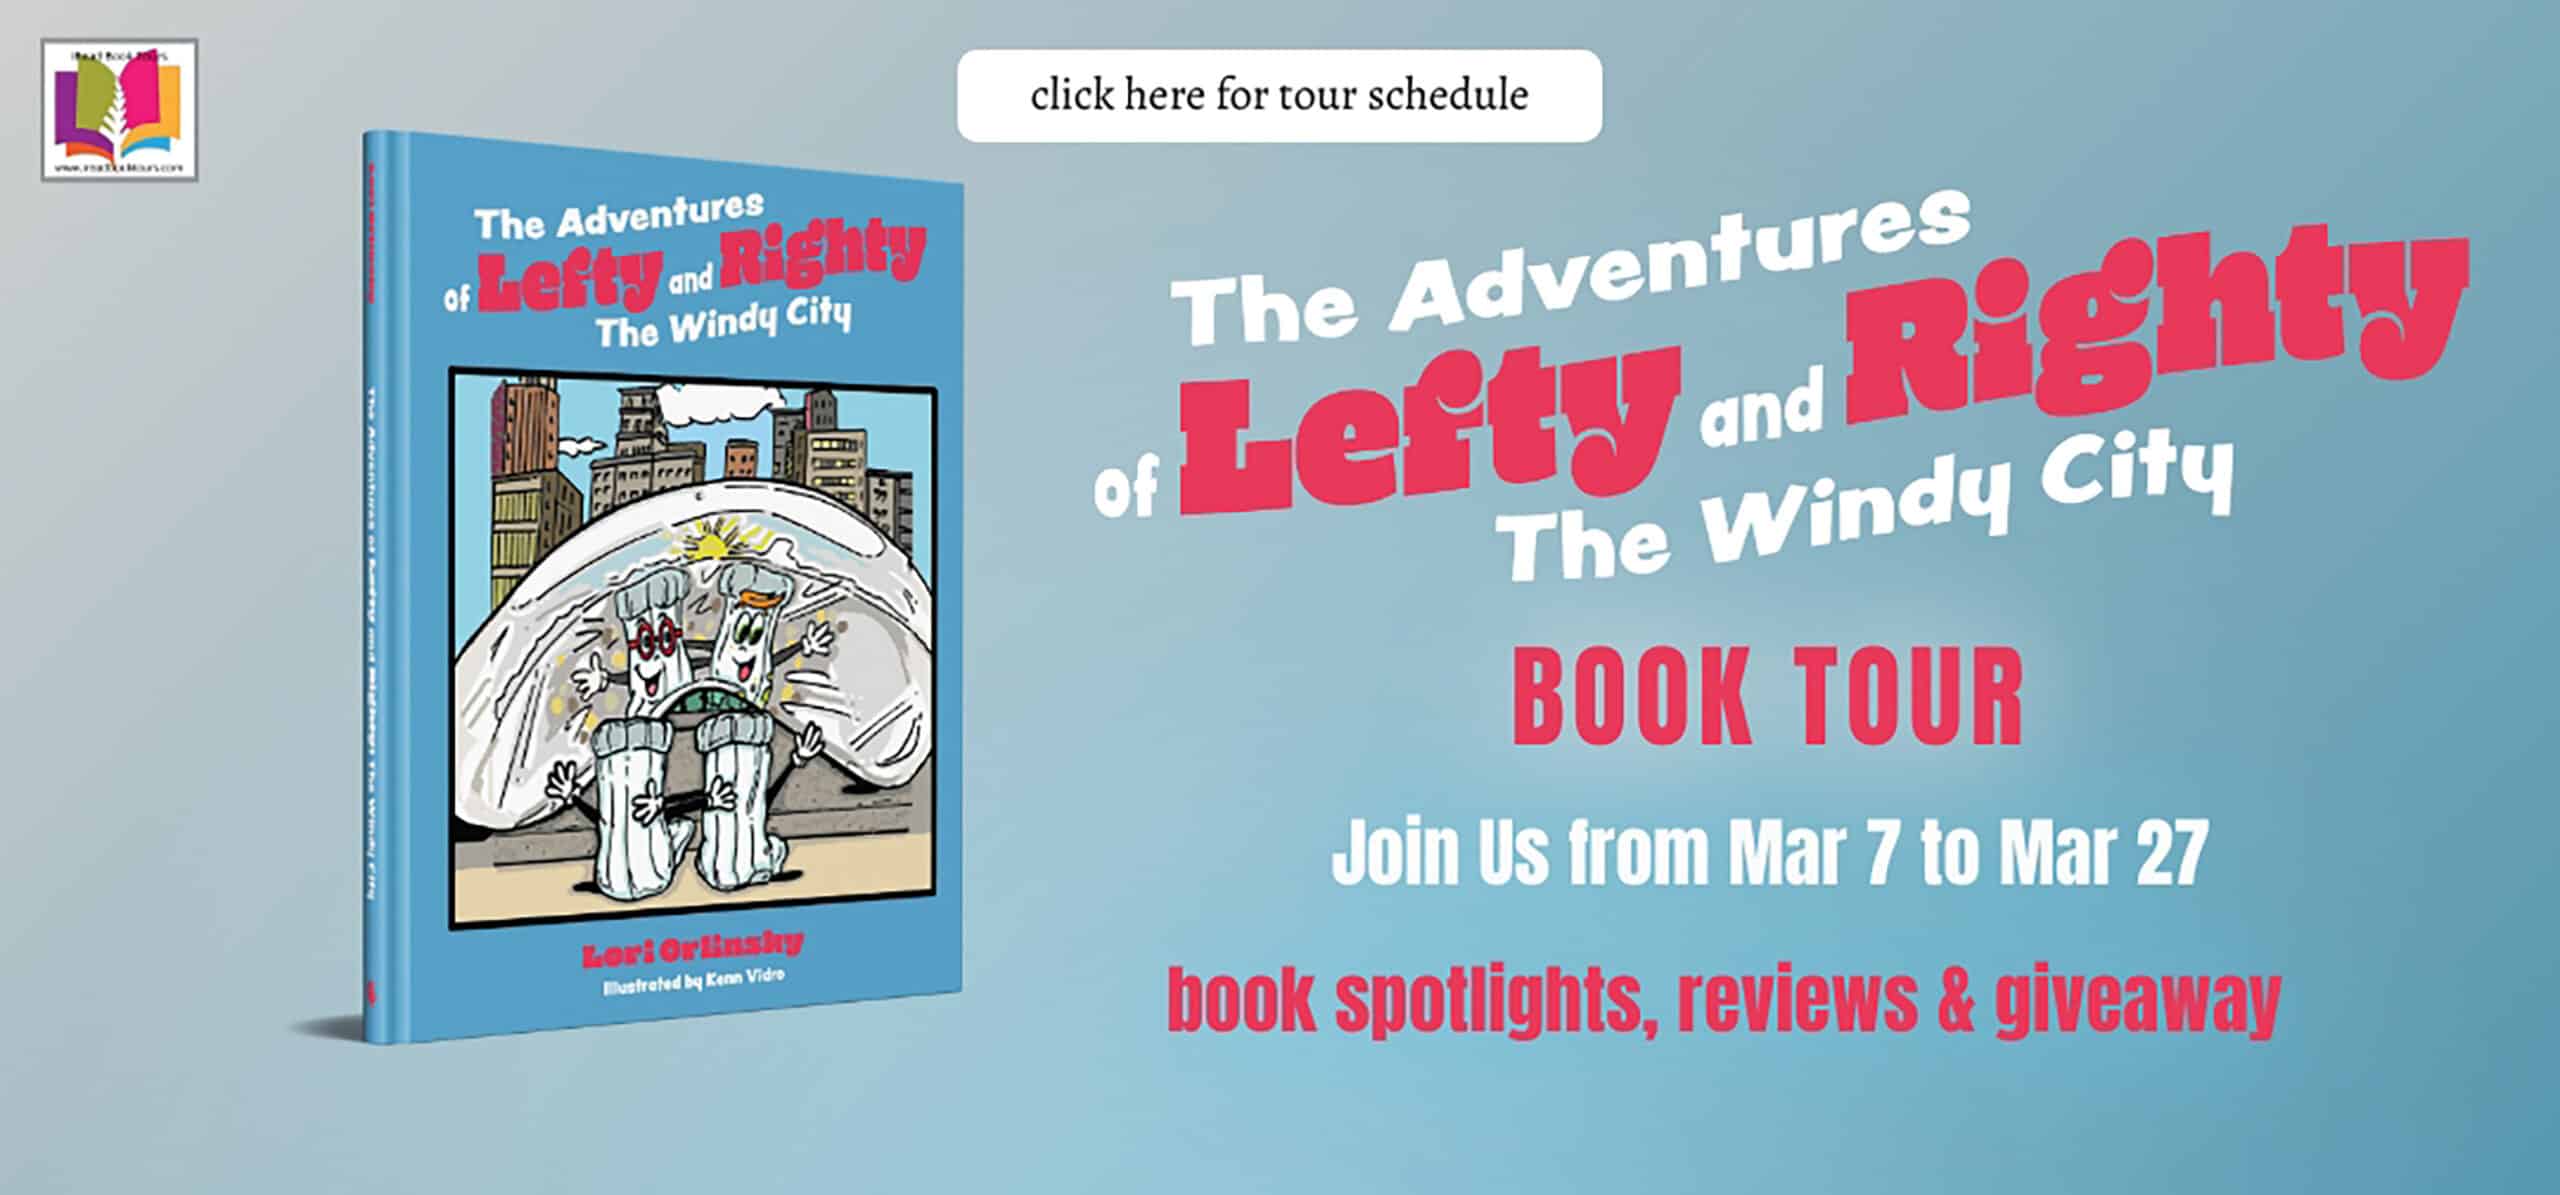 The Adventures of Lefty and Righty: The Windy City by Lori Orlinsky | Children's Book Review ~